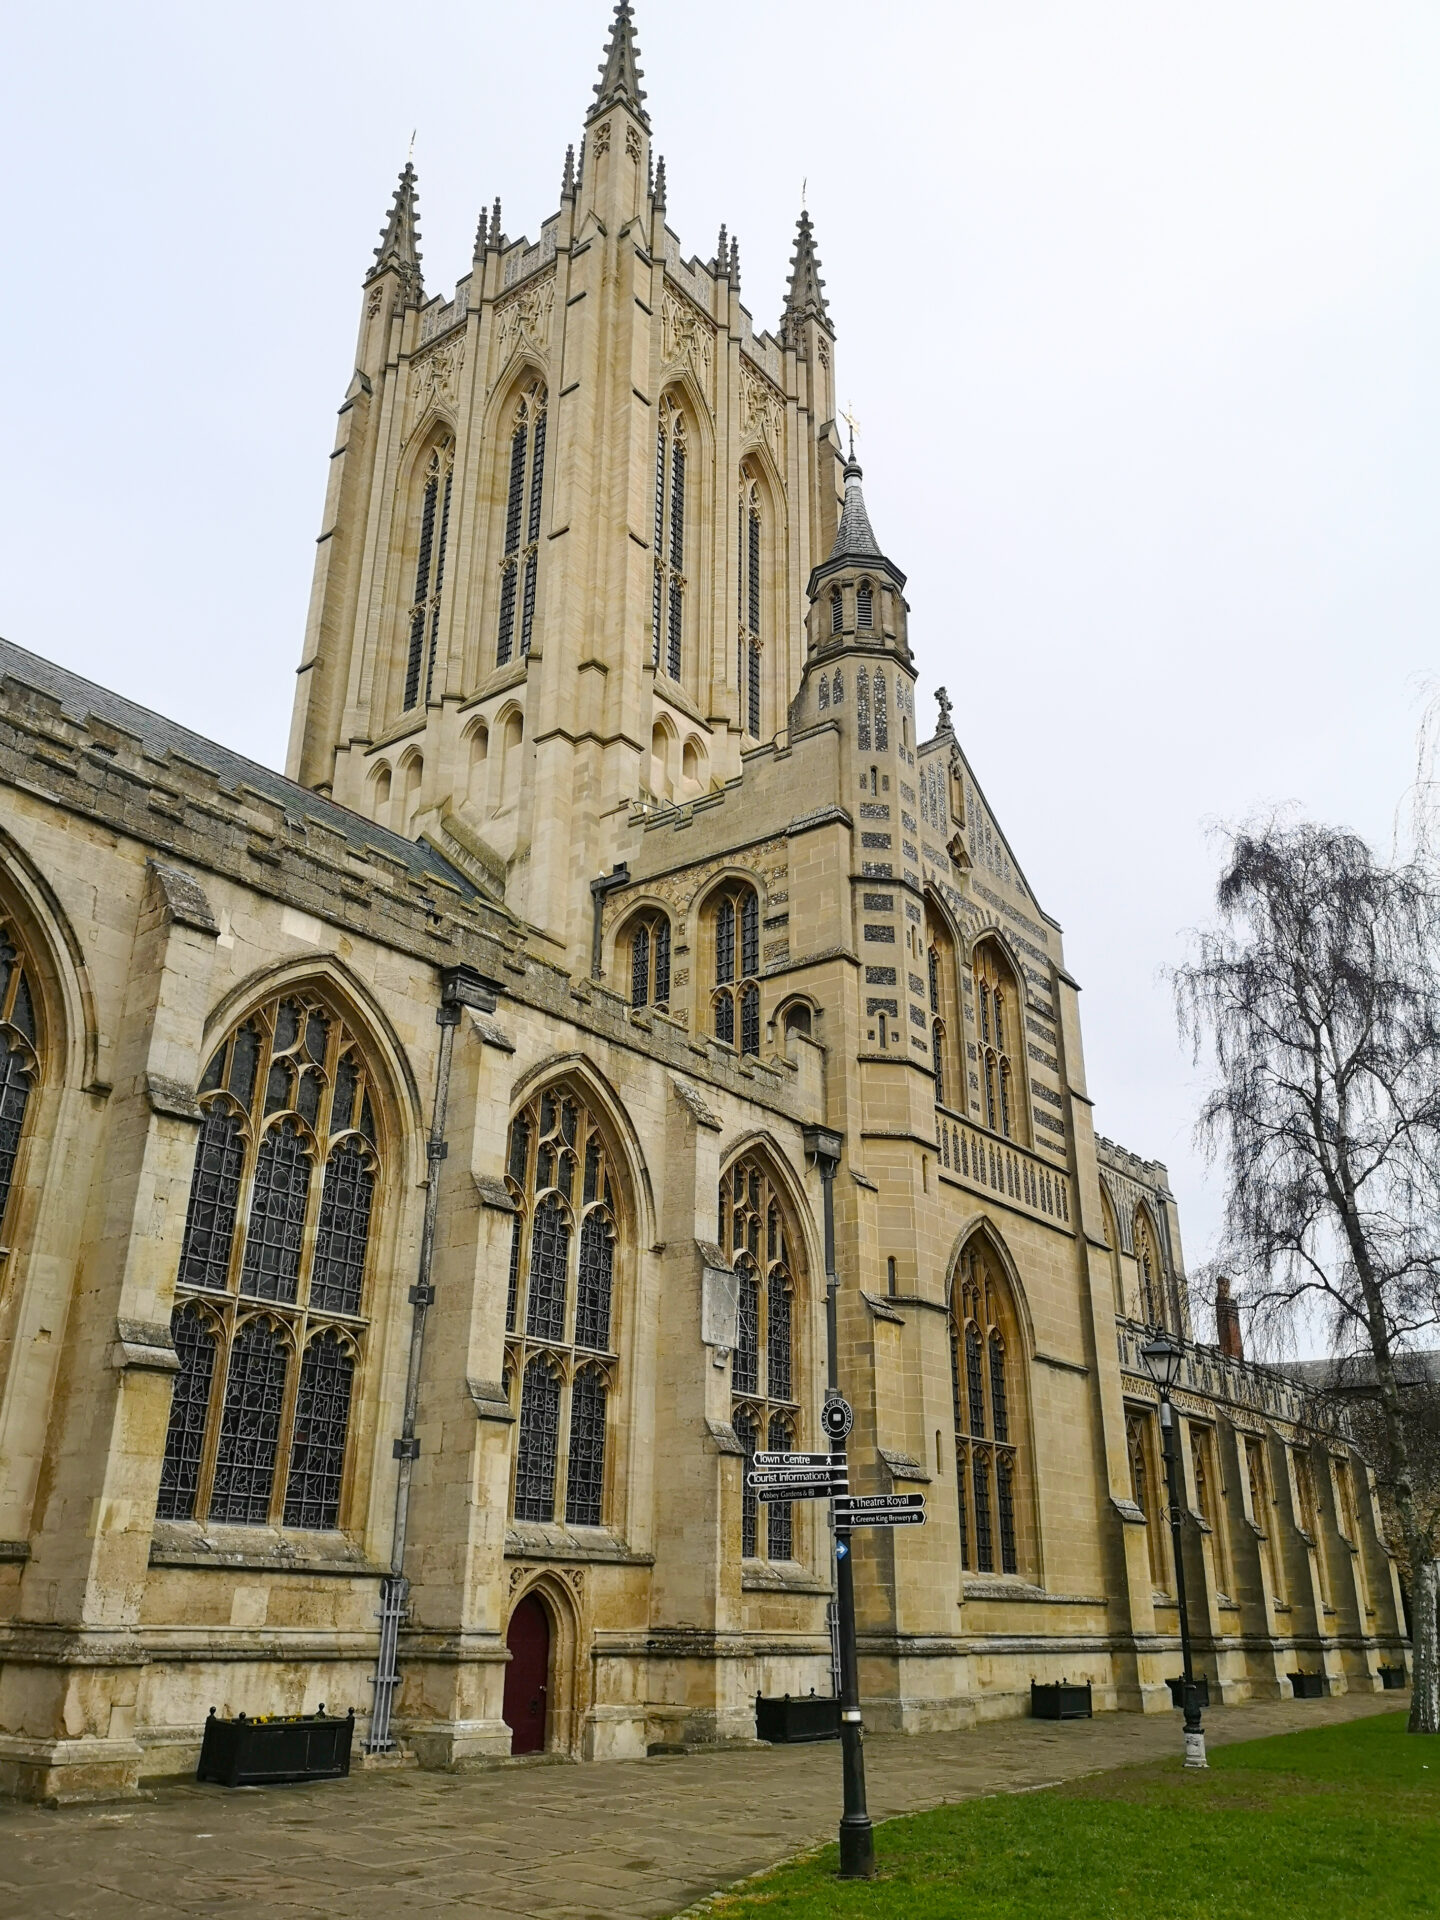 Bury St Edmunds, Visit Suffolk, Half-term, Family Fun, Visit England, East Anglia, Family Trip, Family Visit, Family-Friendly, the Frenchie Mummy, the Angel Hotel, Family Holiday, #burystedmundsandbeyond